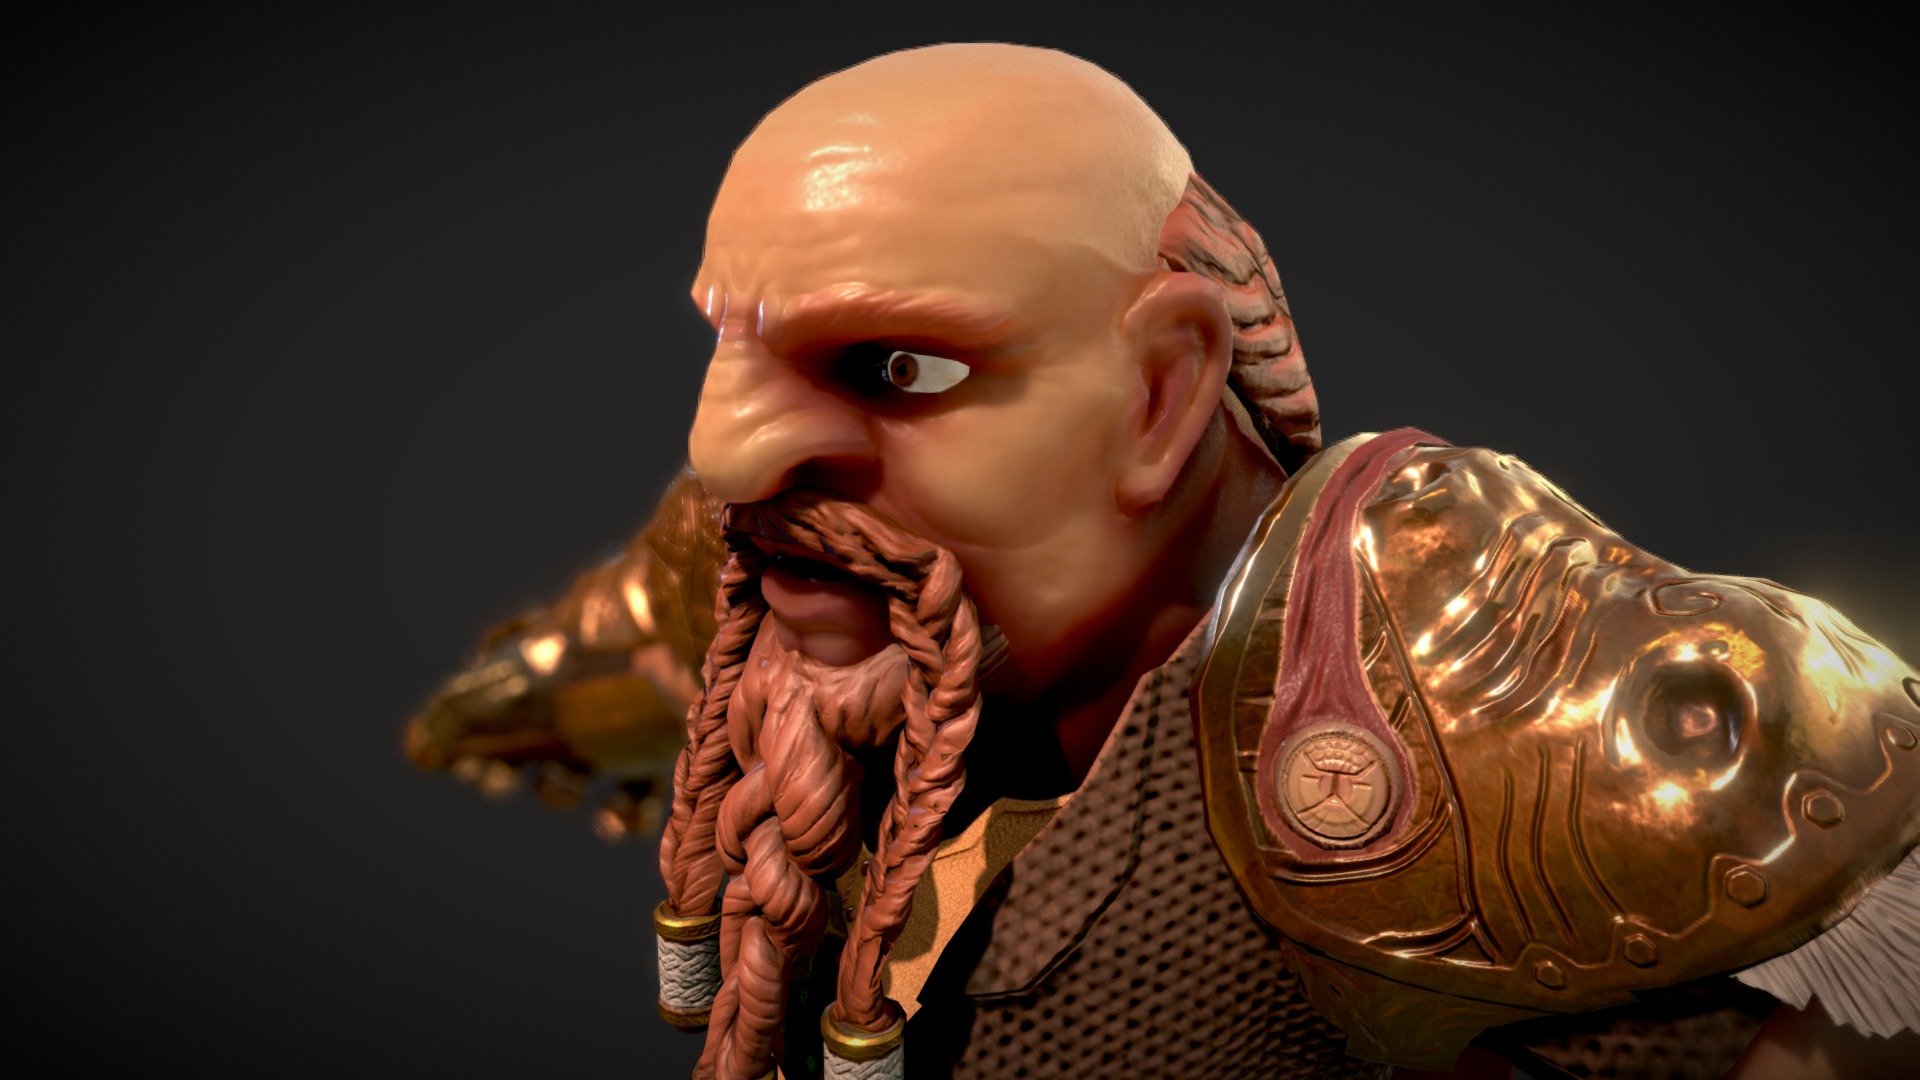 An older project I made while studying. We had to create a bust of a character and I went with an armored dwarf.
Actually the first character I ever made.
Decided to upload him since I've put a lot effort into him so it'd be a shame not to share him anywhere &lt;3
The textures were re-created for best pbr results and the low poly mesh received some polishing, too compared to the original 3d model